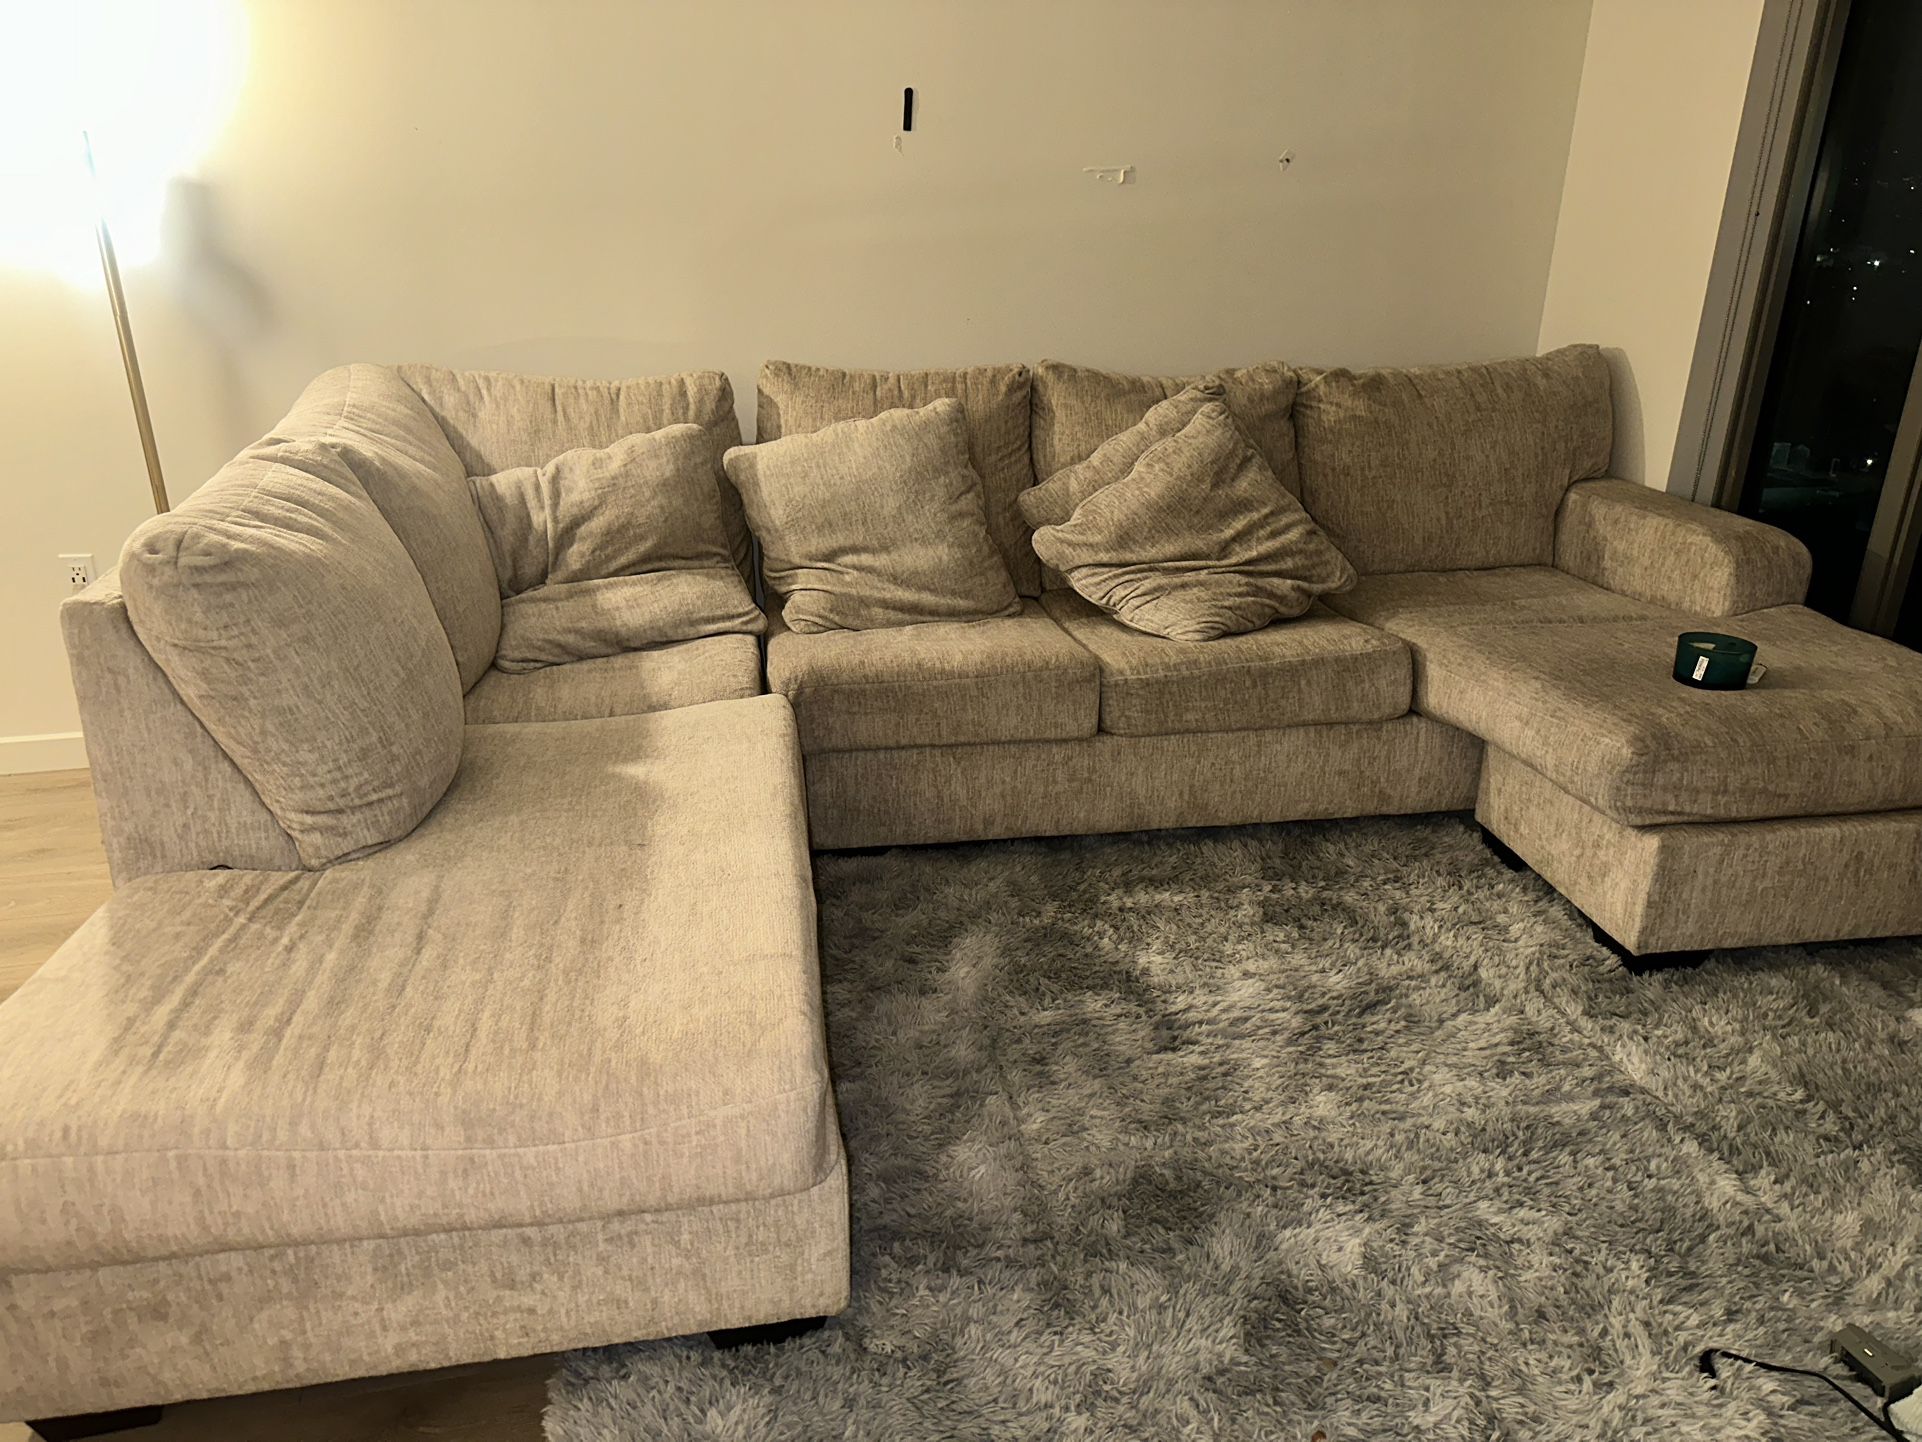 U Sectional 3 Piece Sofa W/ Chaise- MOVING NEED TO SELL ASAP!